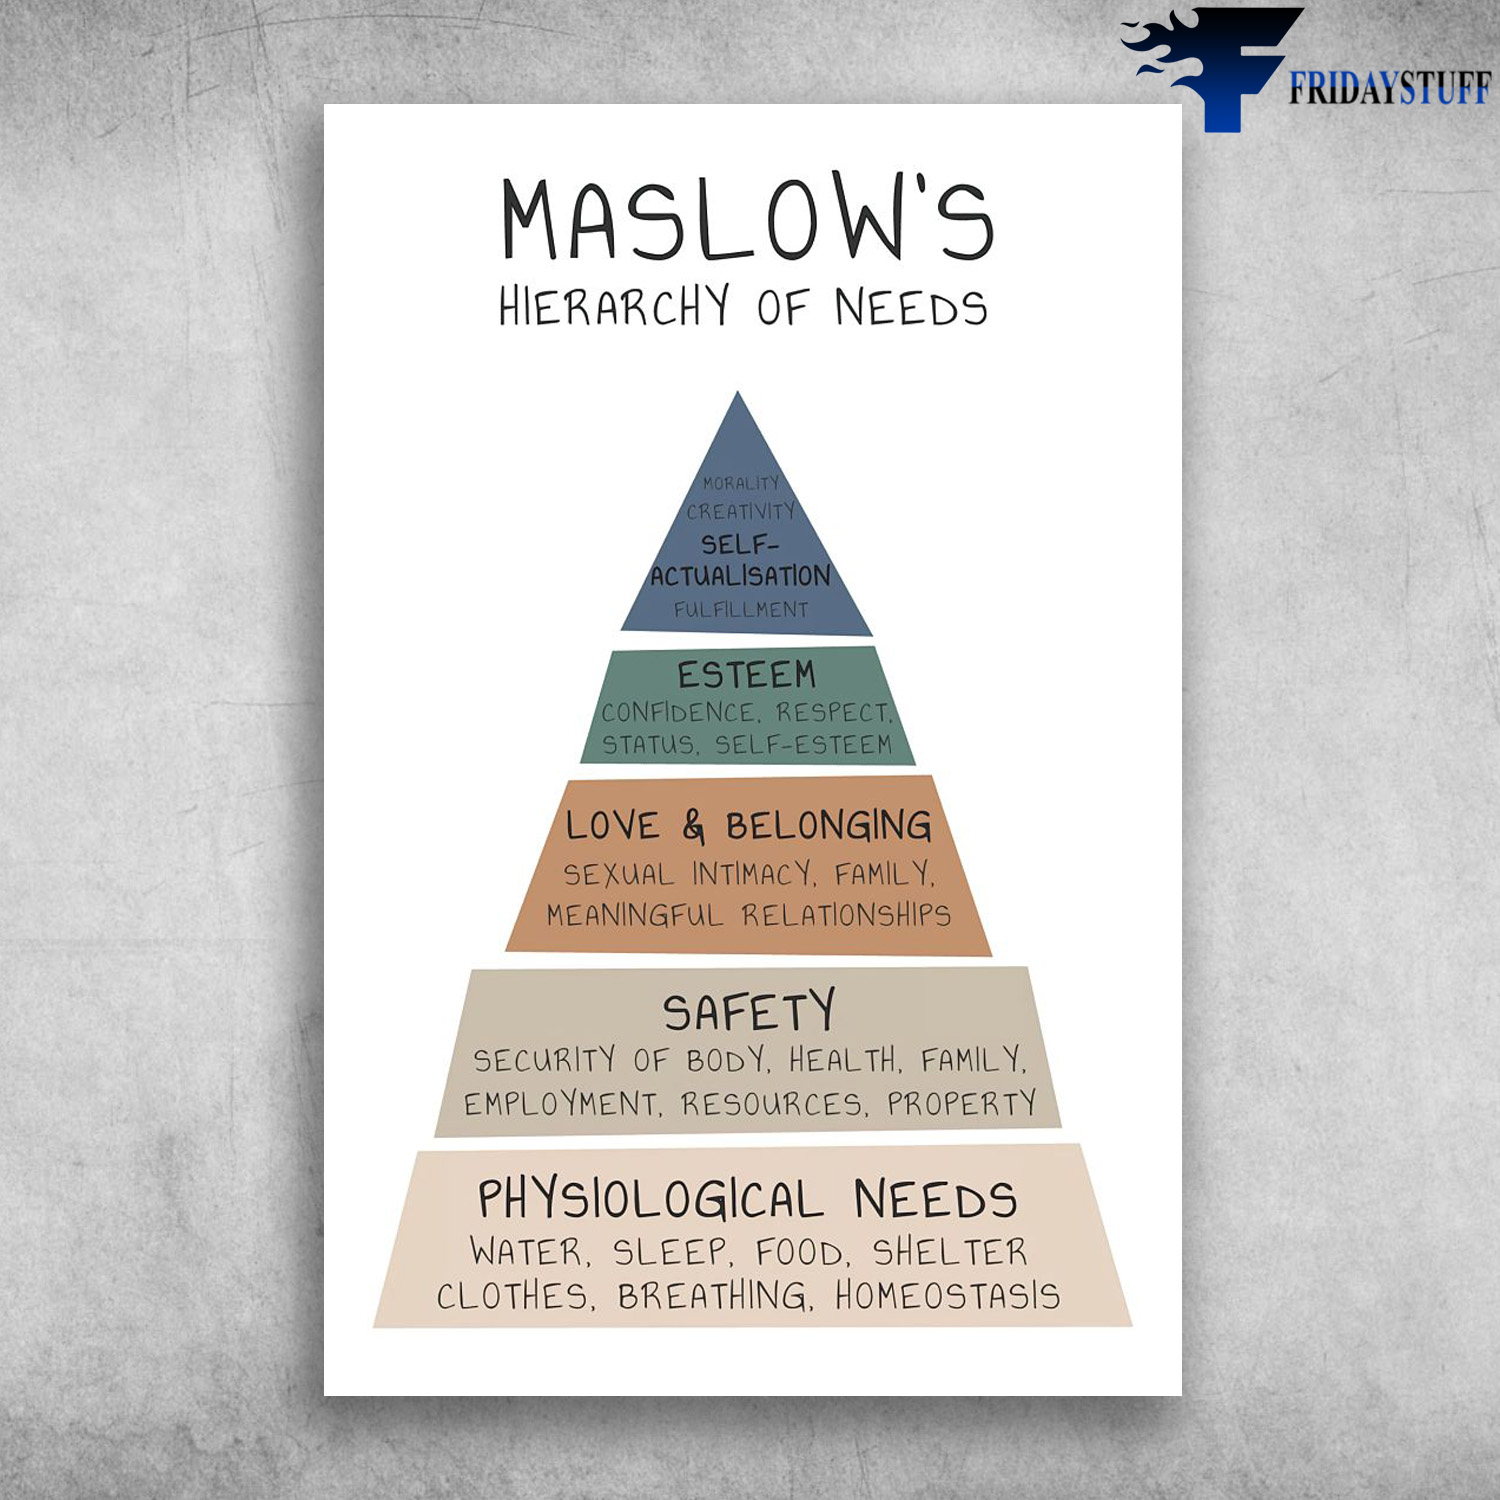 Maslow's Hierarchy Of Needs - Physiological Needs, Safety, Love And Belonging, Esteem, Self-Actualisation